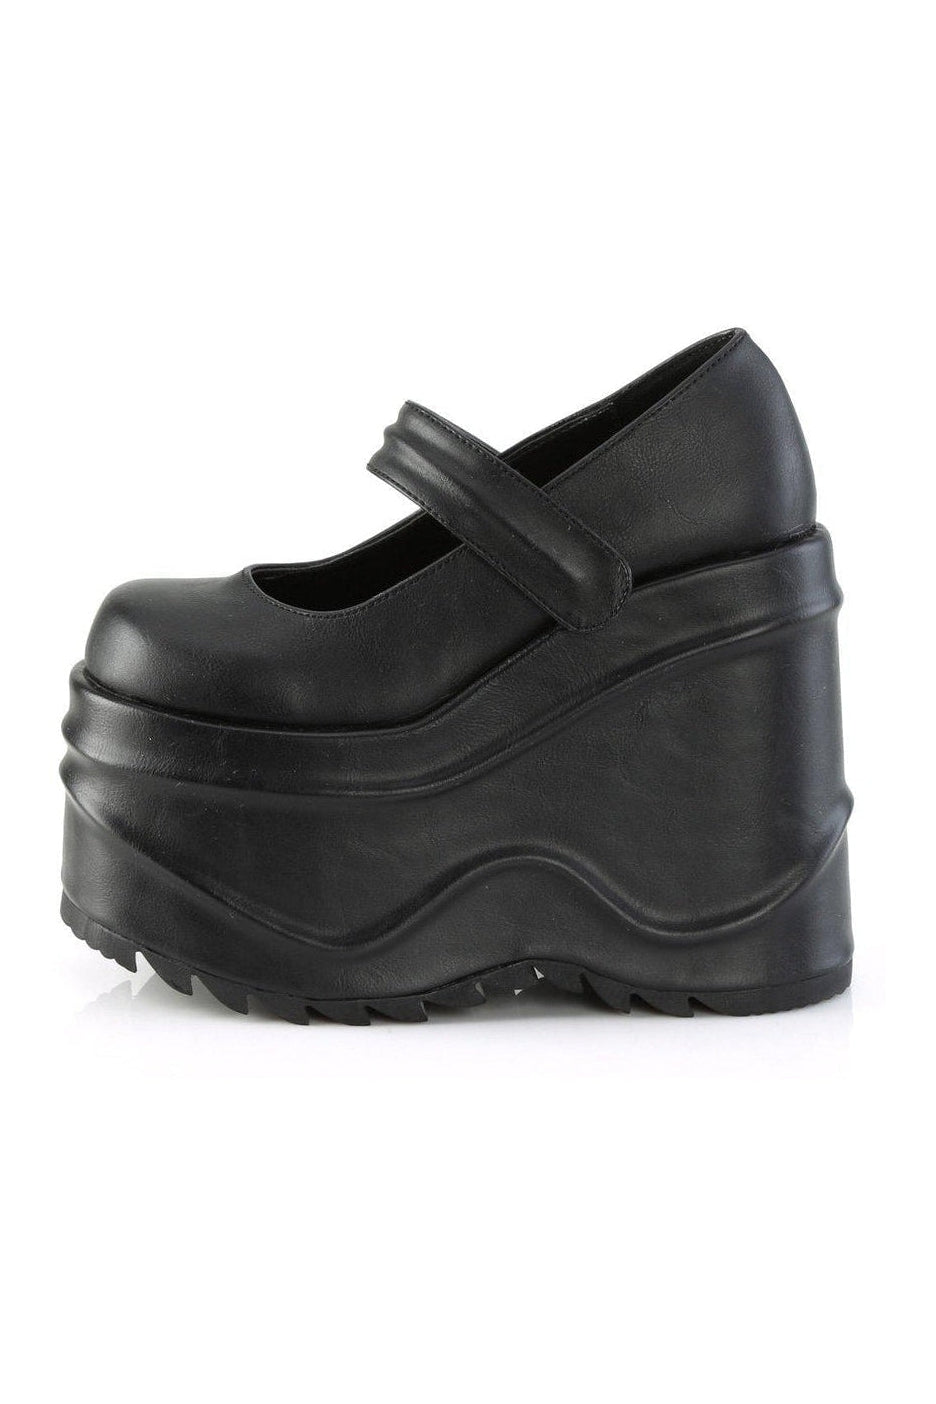 WAVE-32 Mary Jane | Black Faux Leather-Mary Janes-Demonia-SEXYSHOES.COM